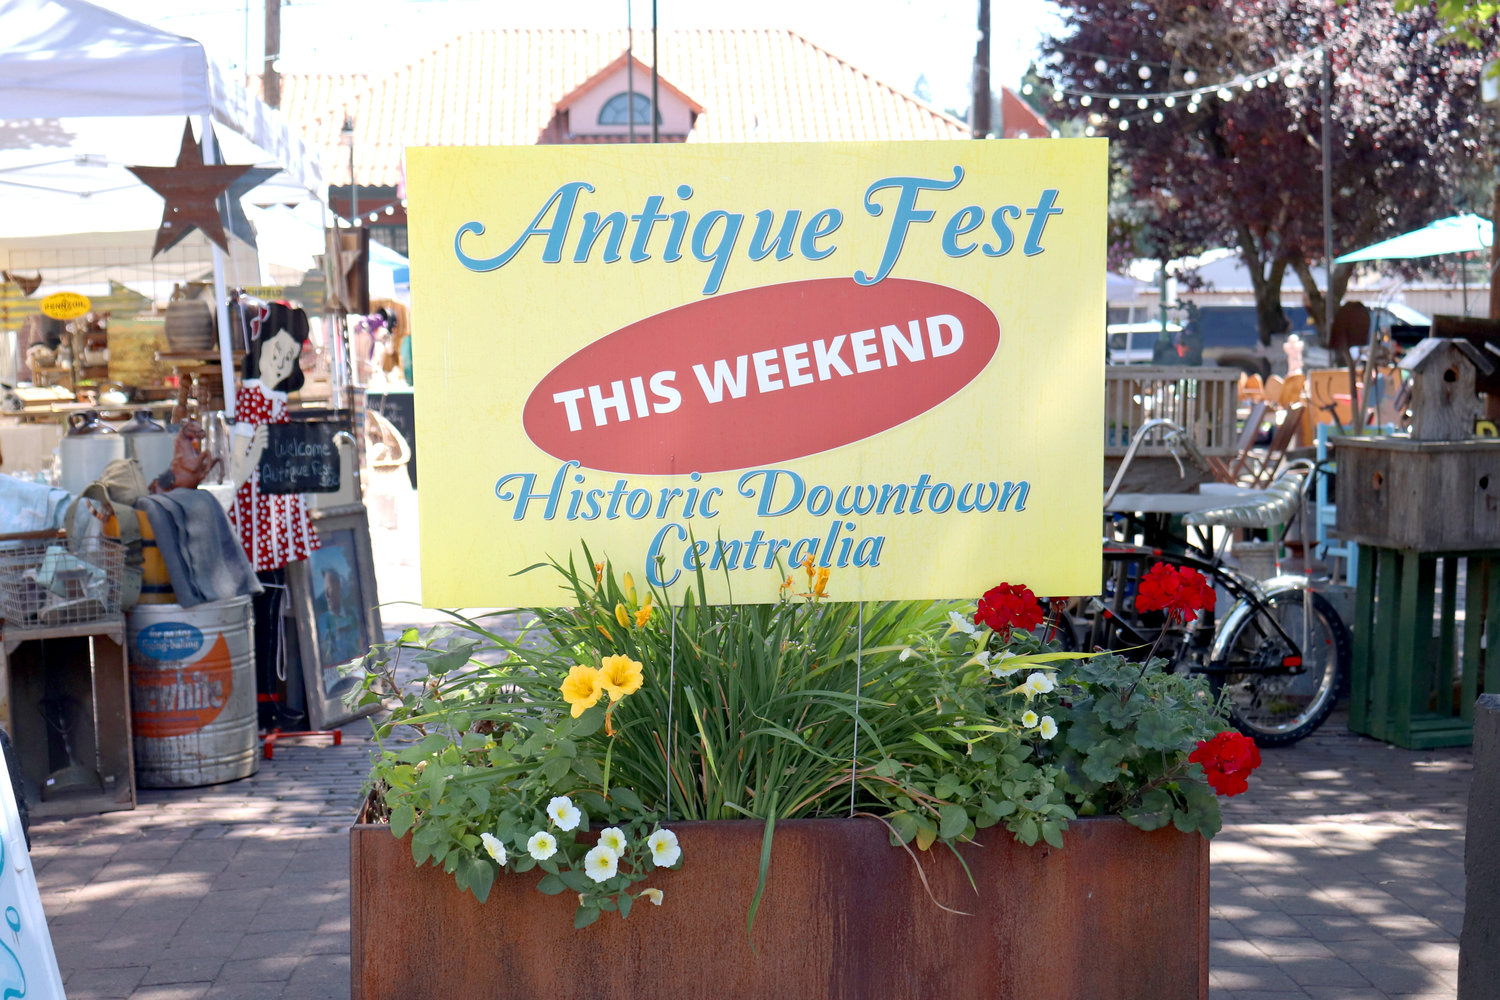 A sign marks the location of Antique Fest in downtown Centralia on Sunday. “Antique, primitive, vintage, farmhouse chic, up cycled, rusty junk — whatever you call it, we have it,” flea market organizers wrote.